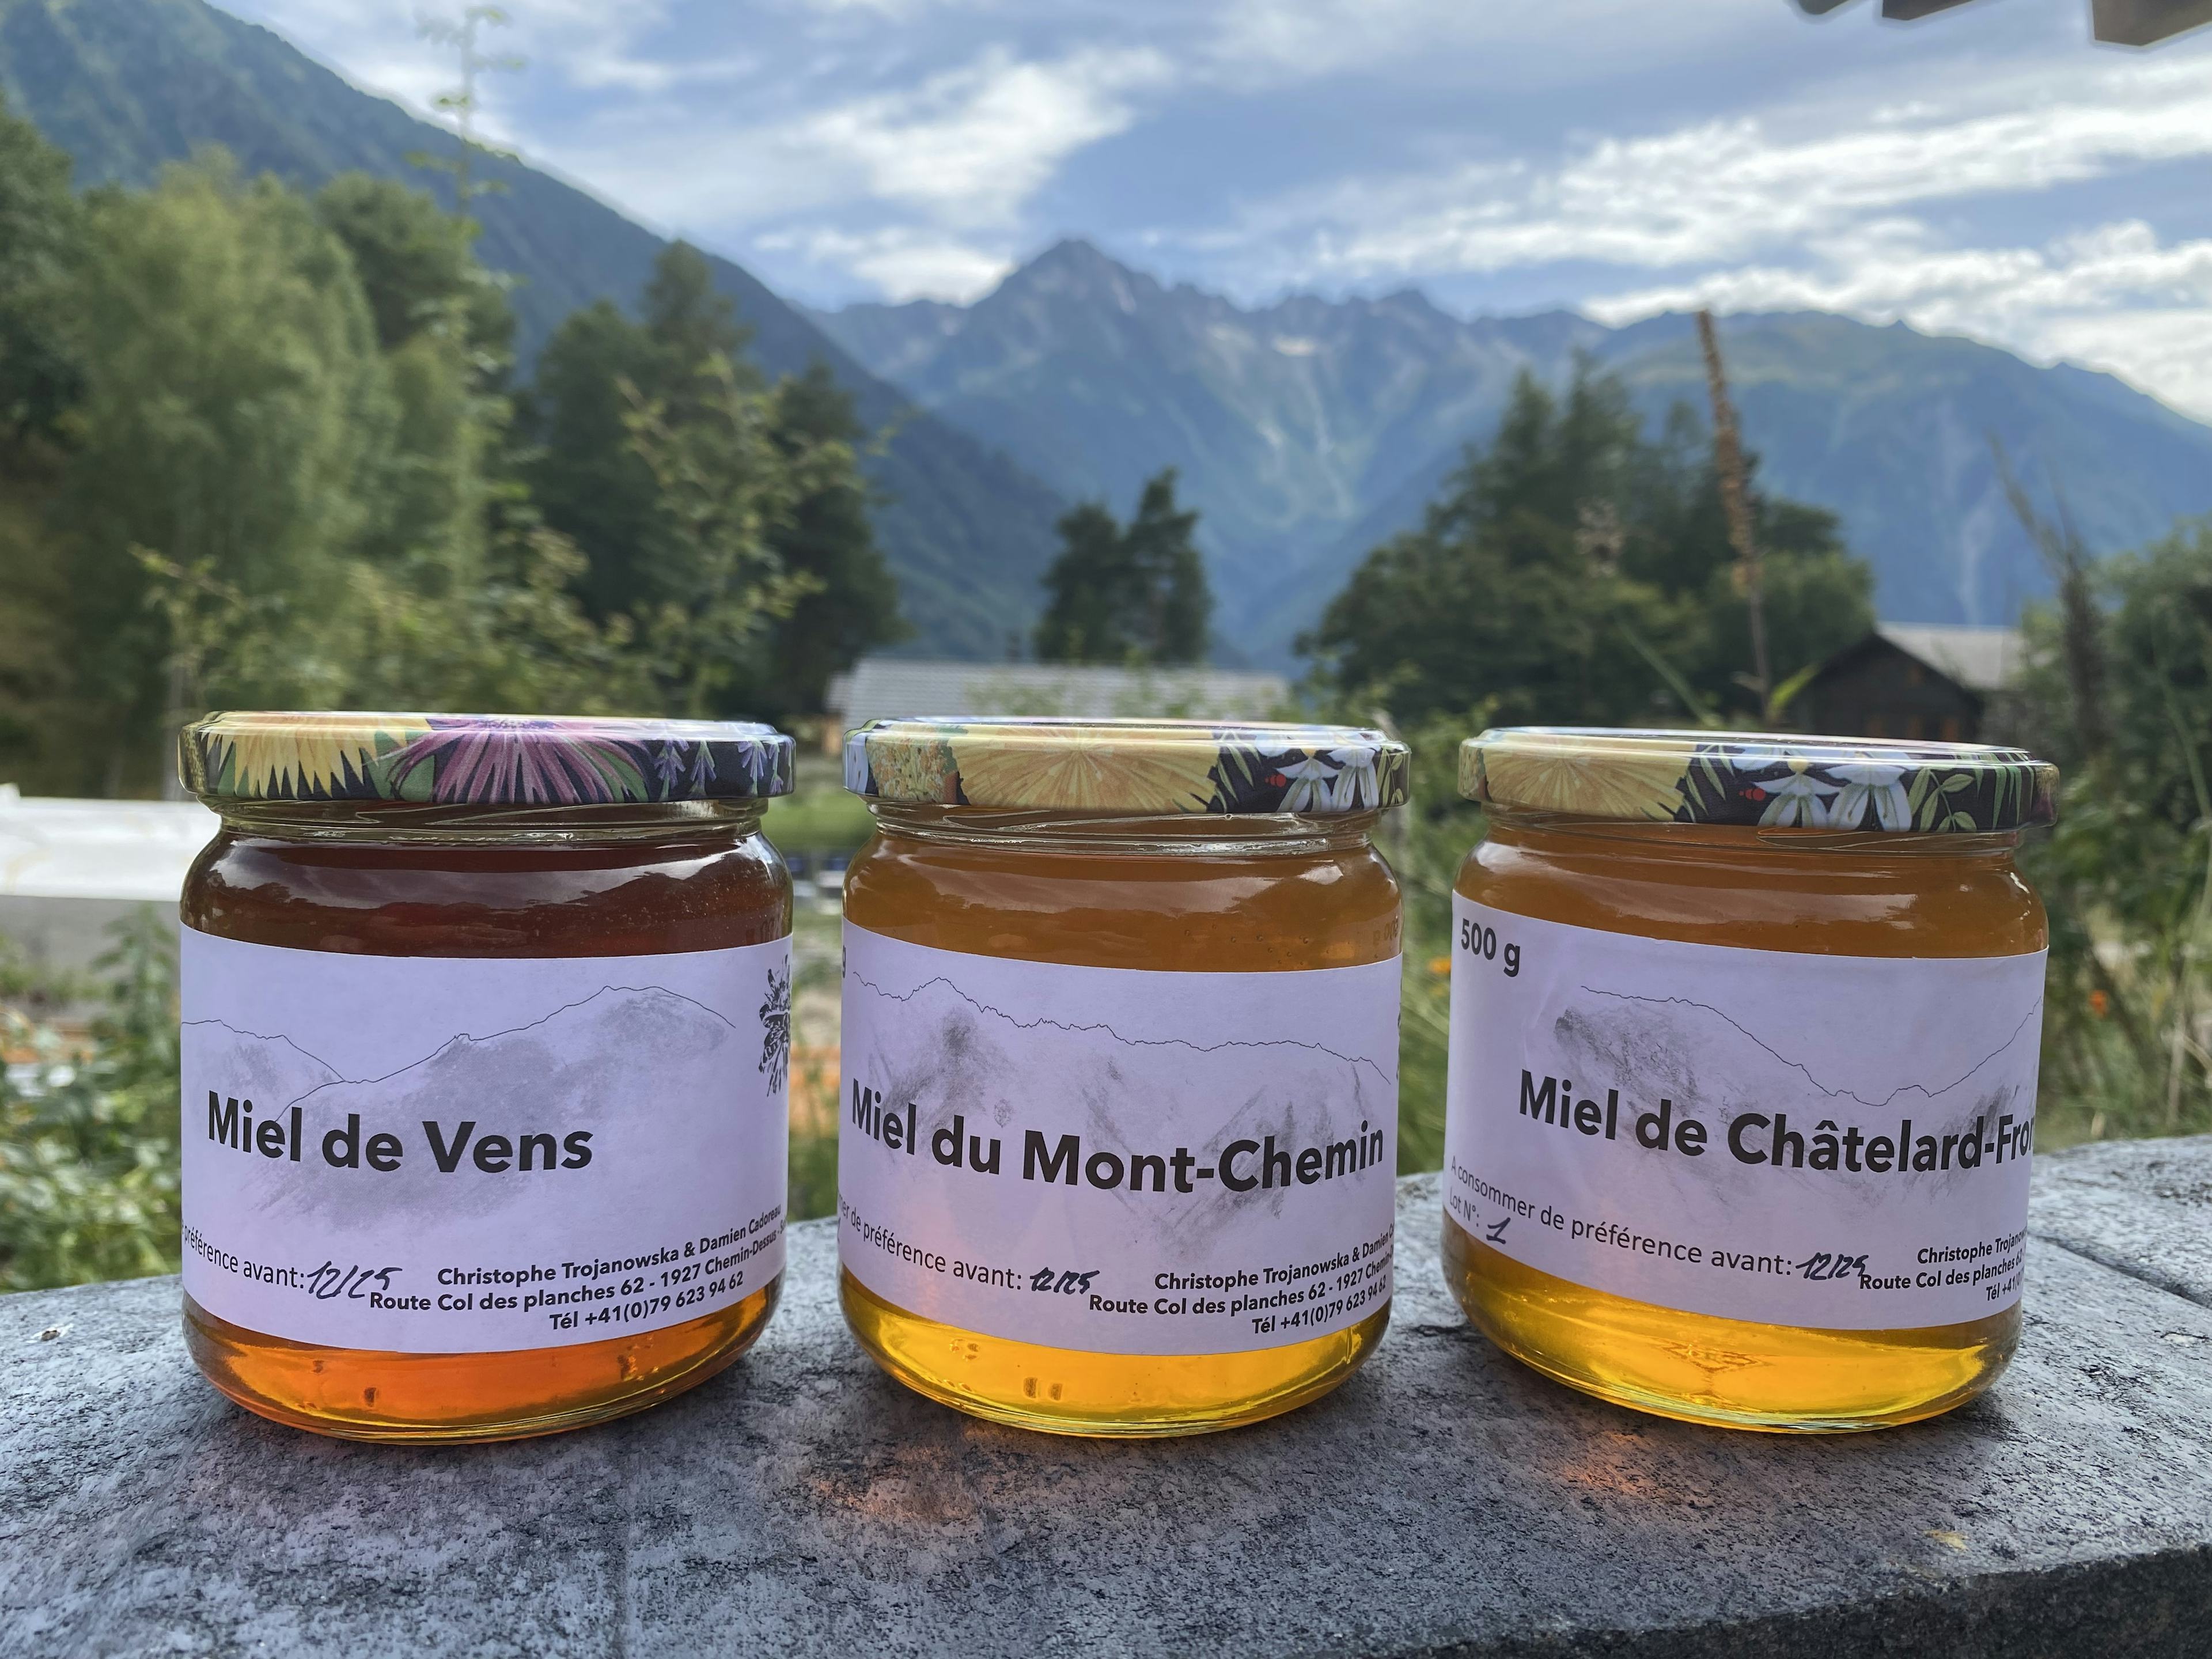 Miel, artisanal product for direct sale in Switzerland